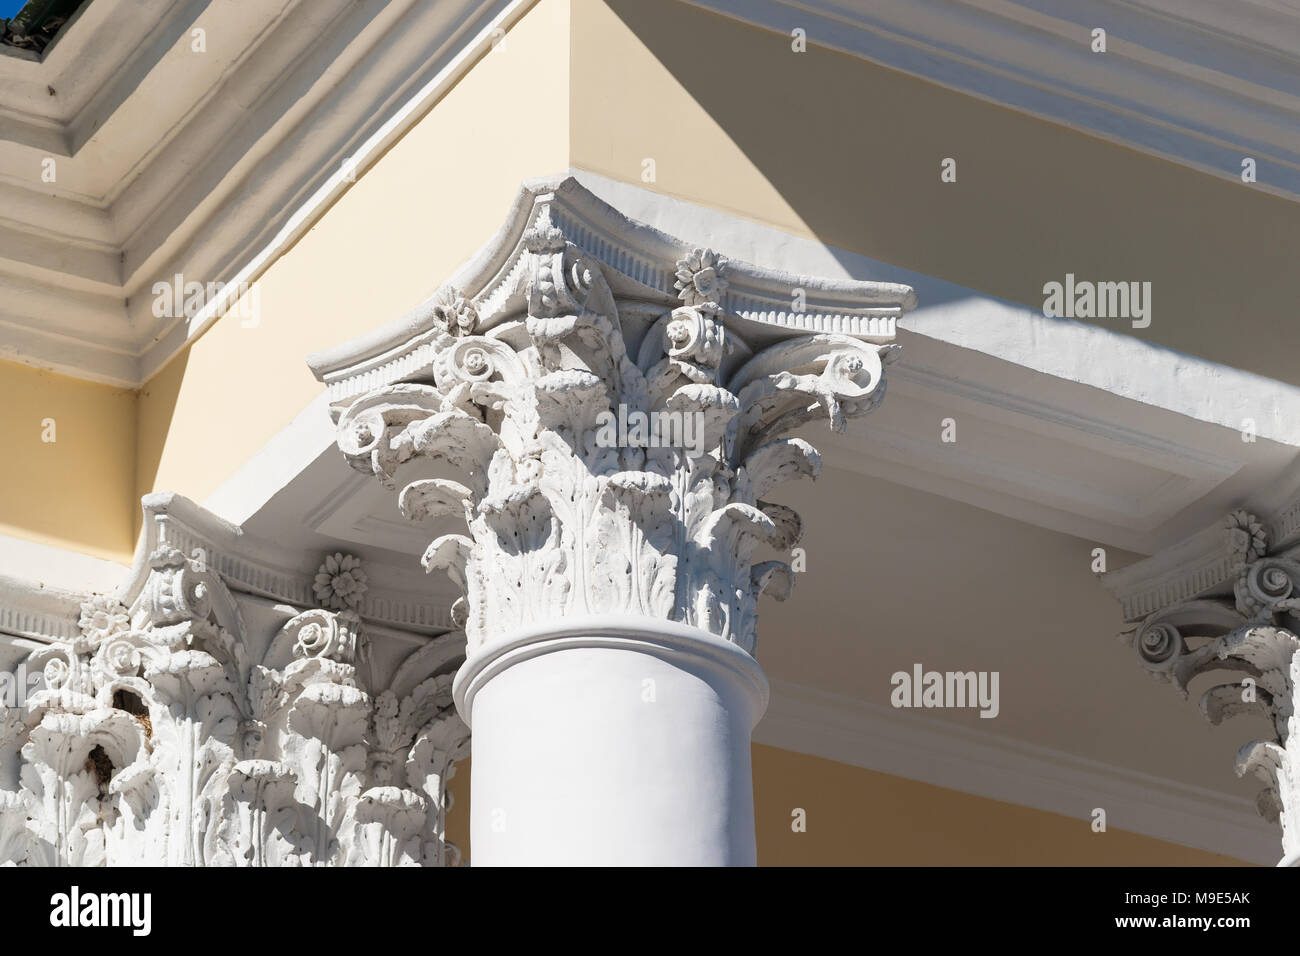 Corinthian capital of a vintage column, which supports a roof eave of a old stylish house Stock Photo